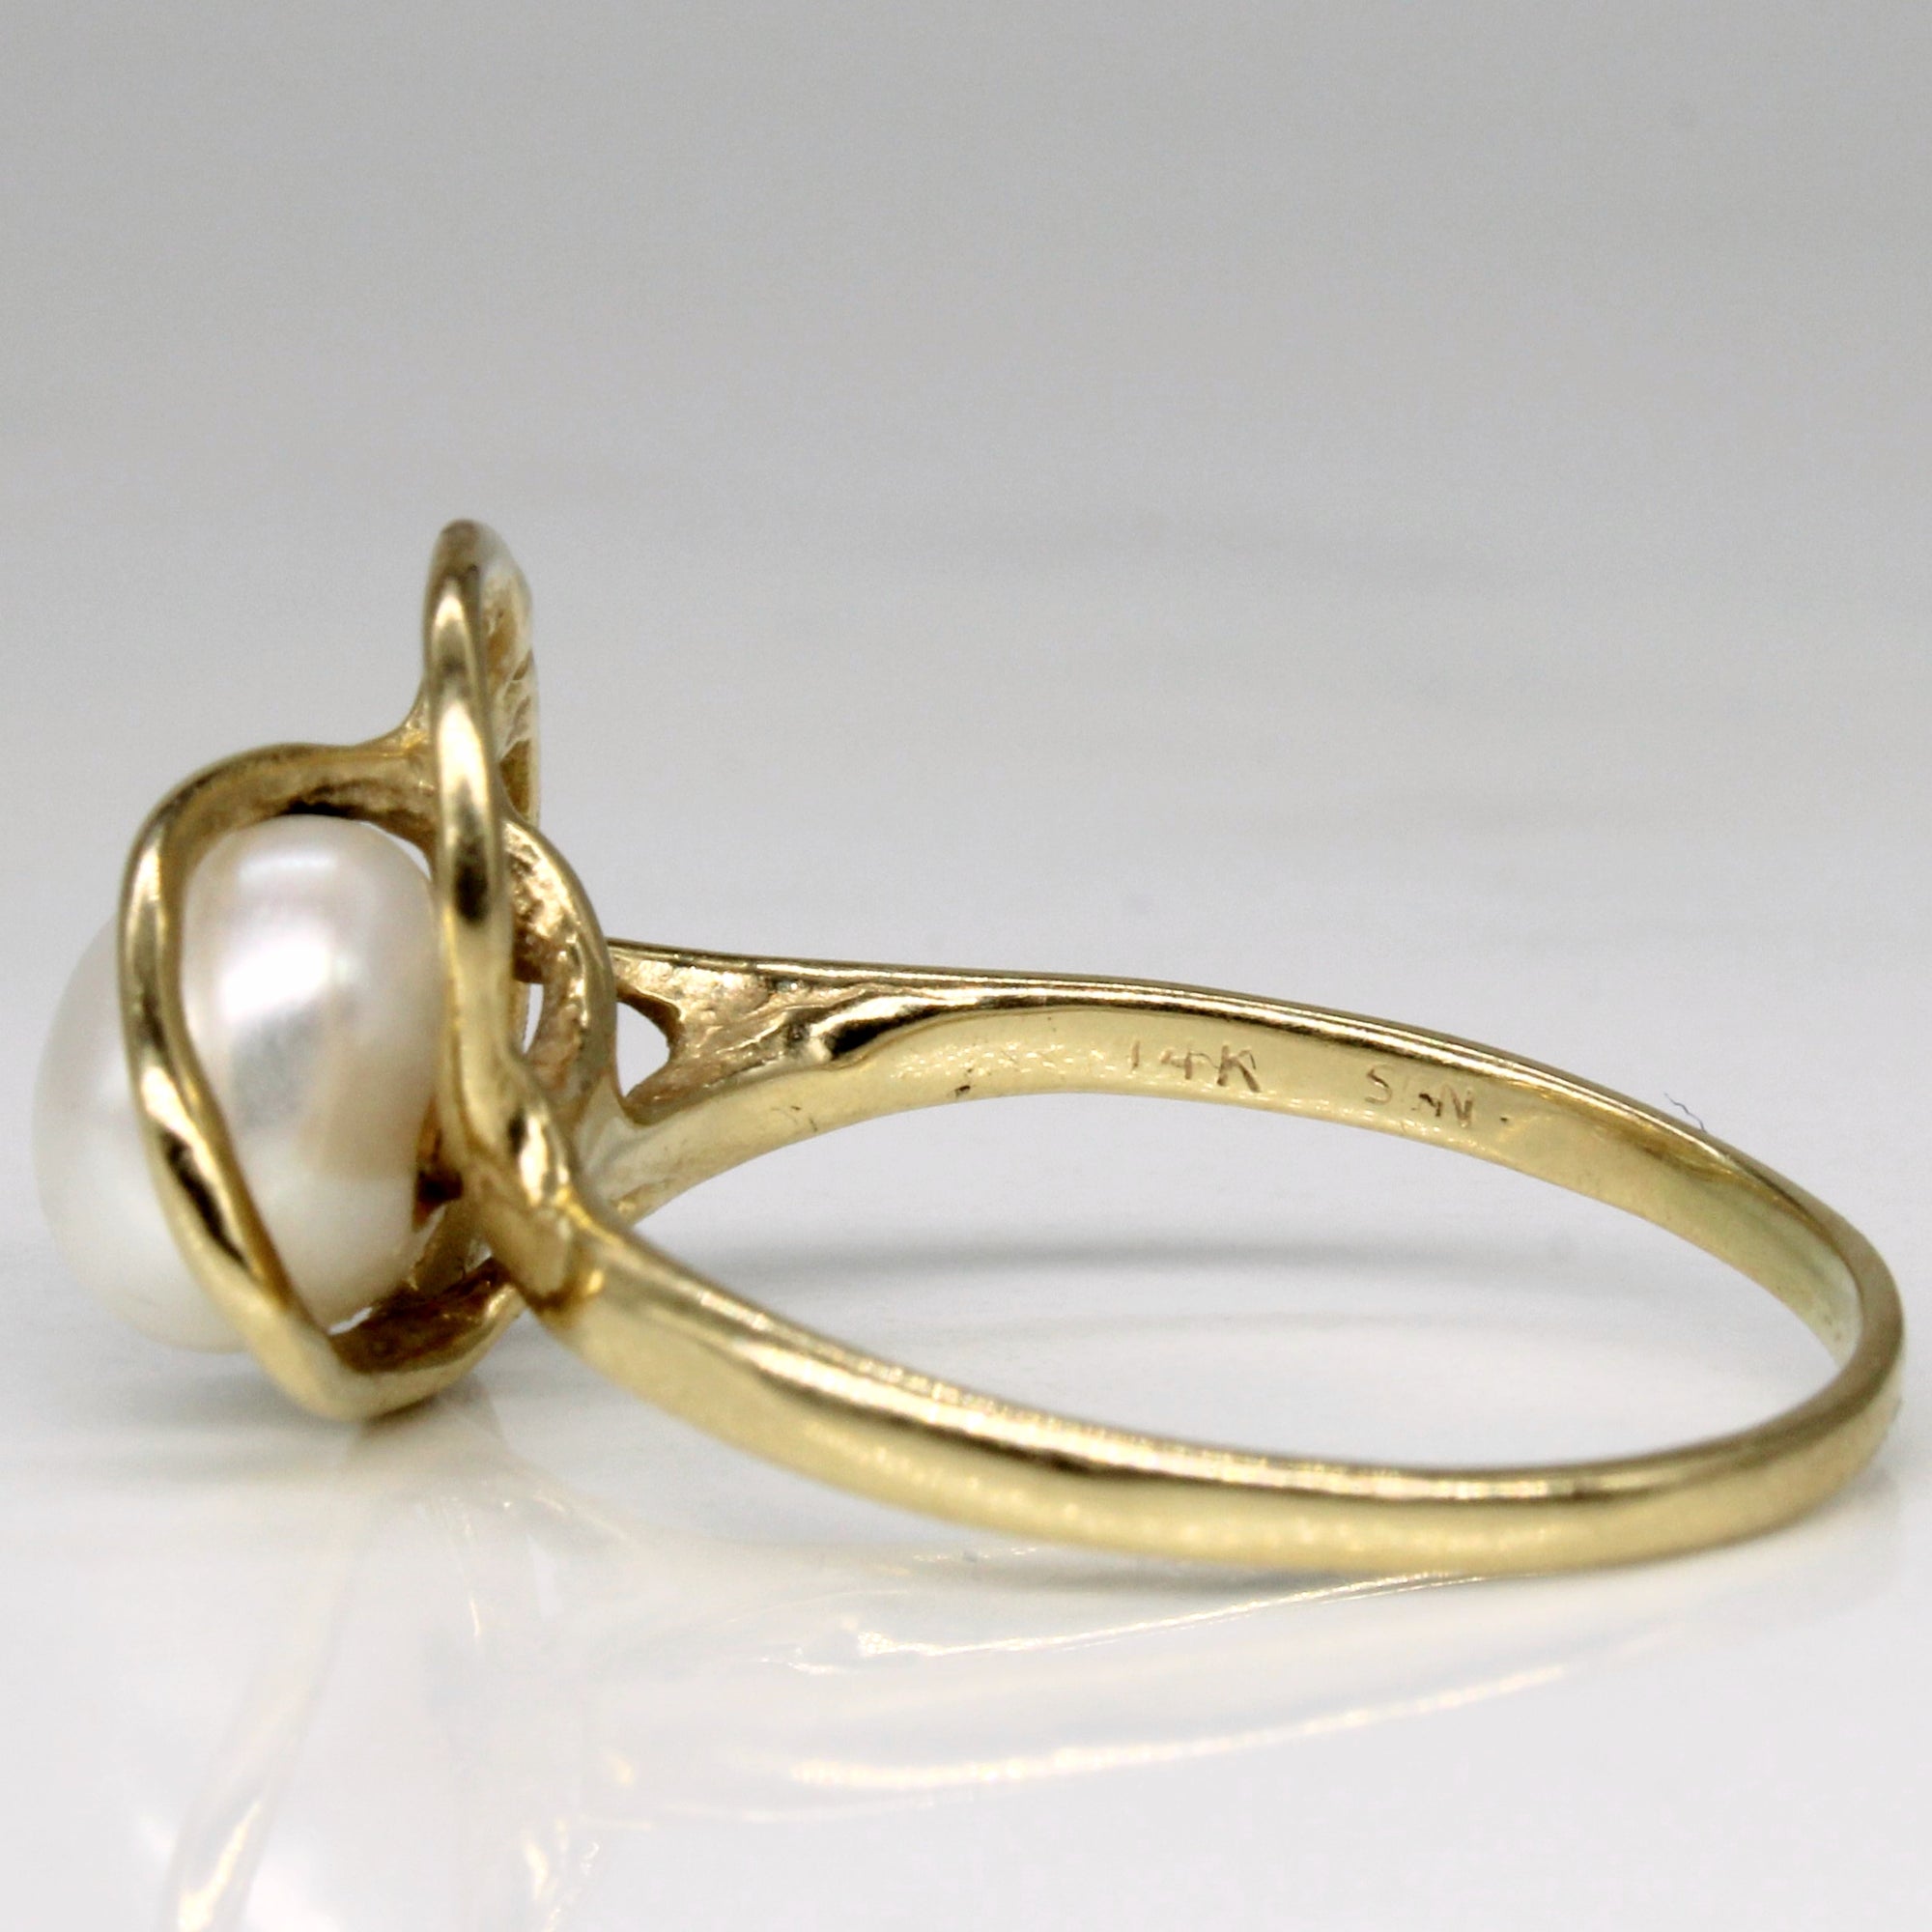 Abstract Baroque Pearl Ring | SZ 7.75 |